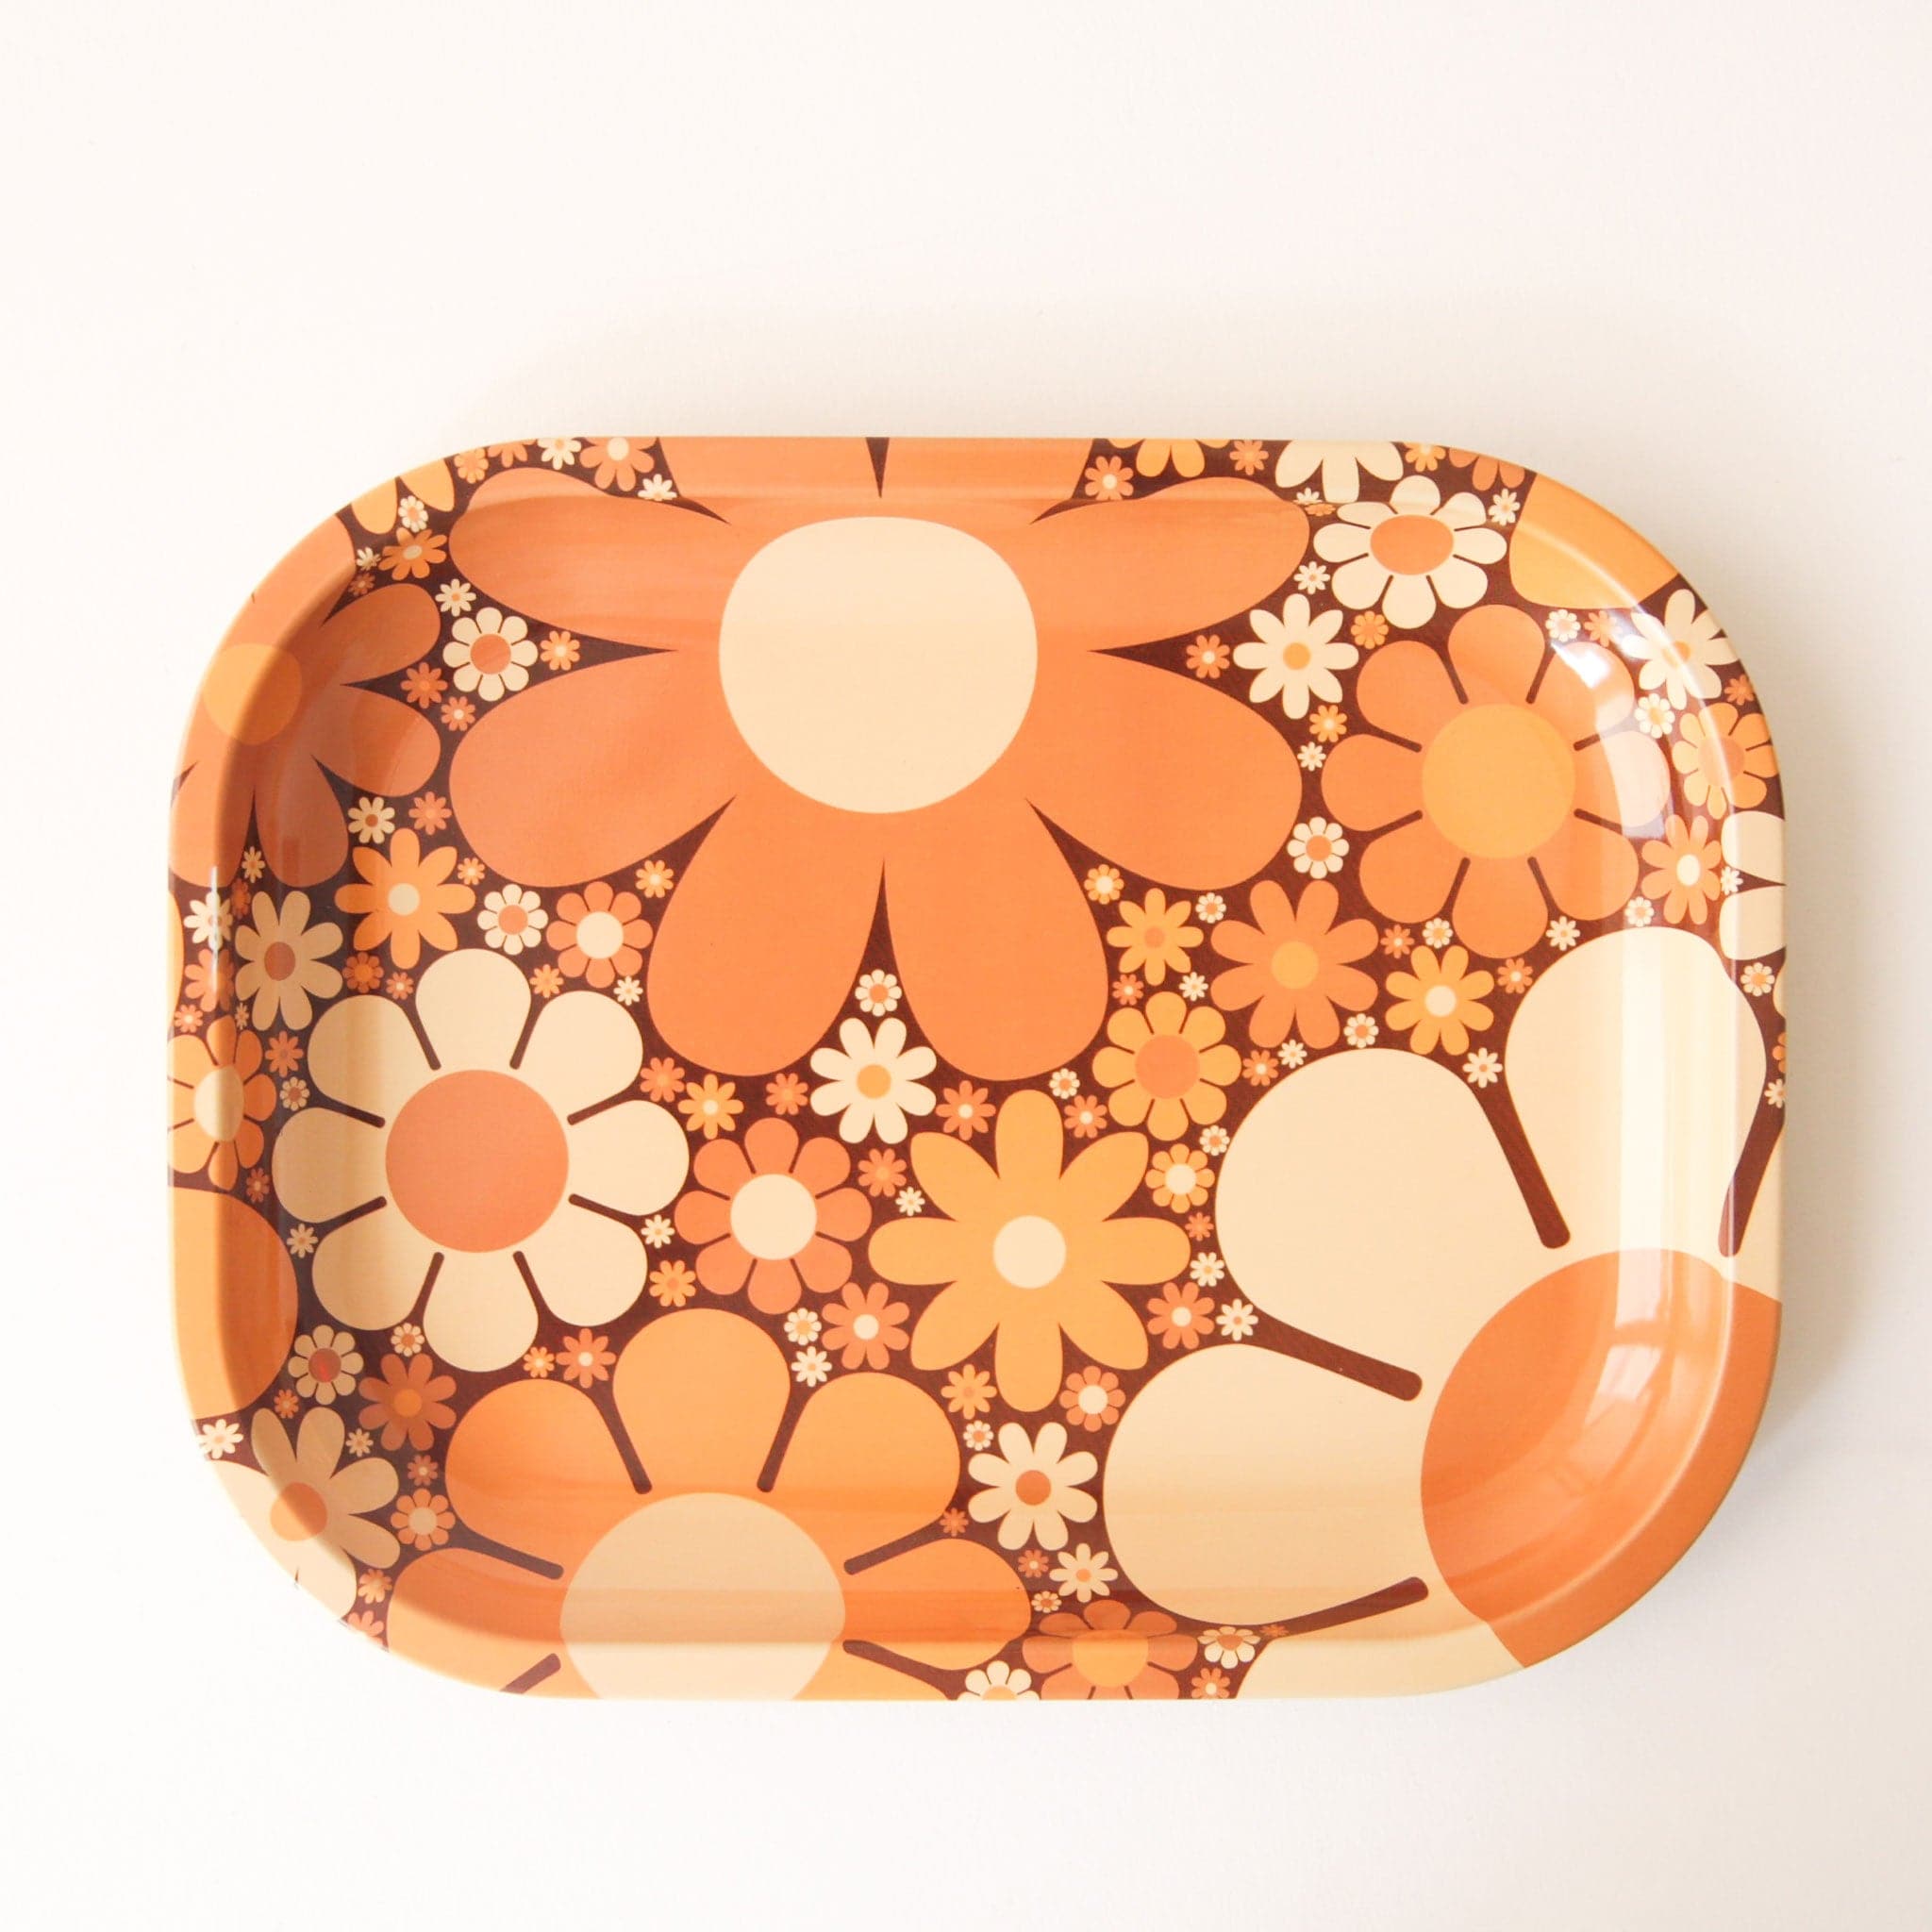 A metal tray perfect for rolling or all your favorite trinkets. It features a 70&#39;s inspired floral design with a variation of daisies in different shapes, sizes and colors.